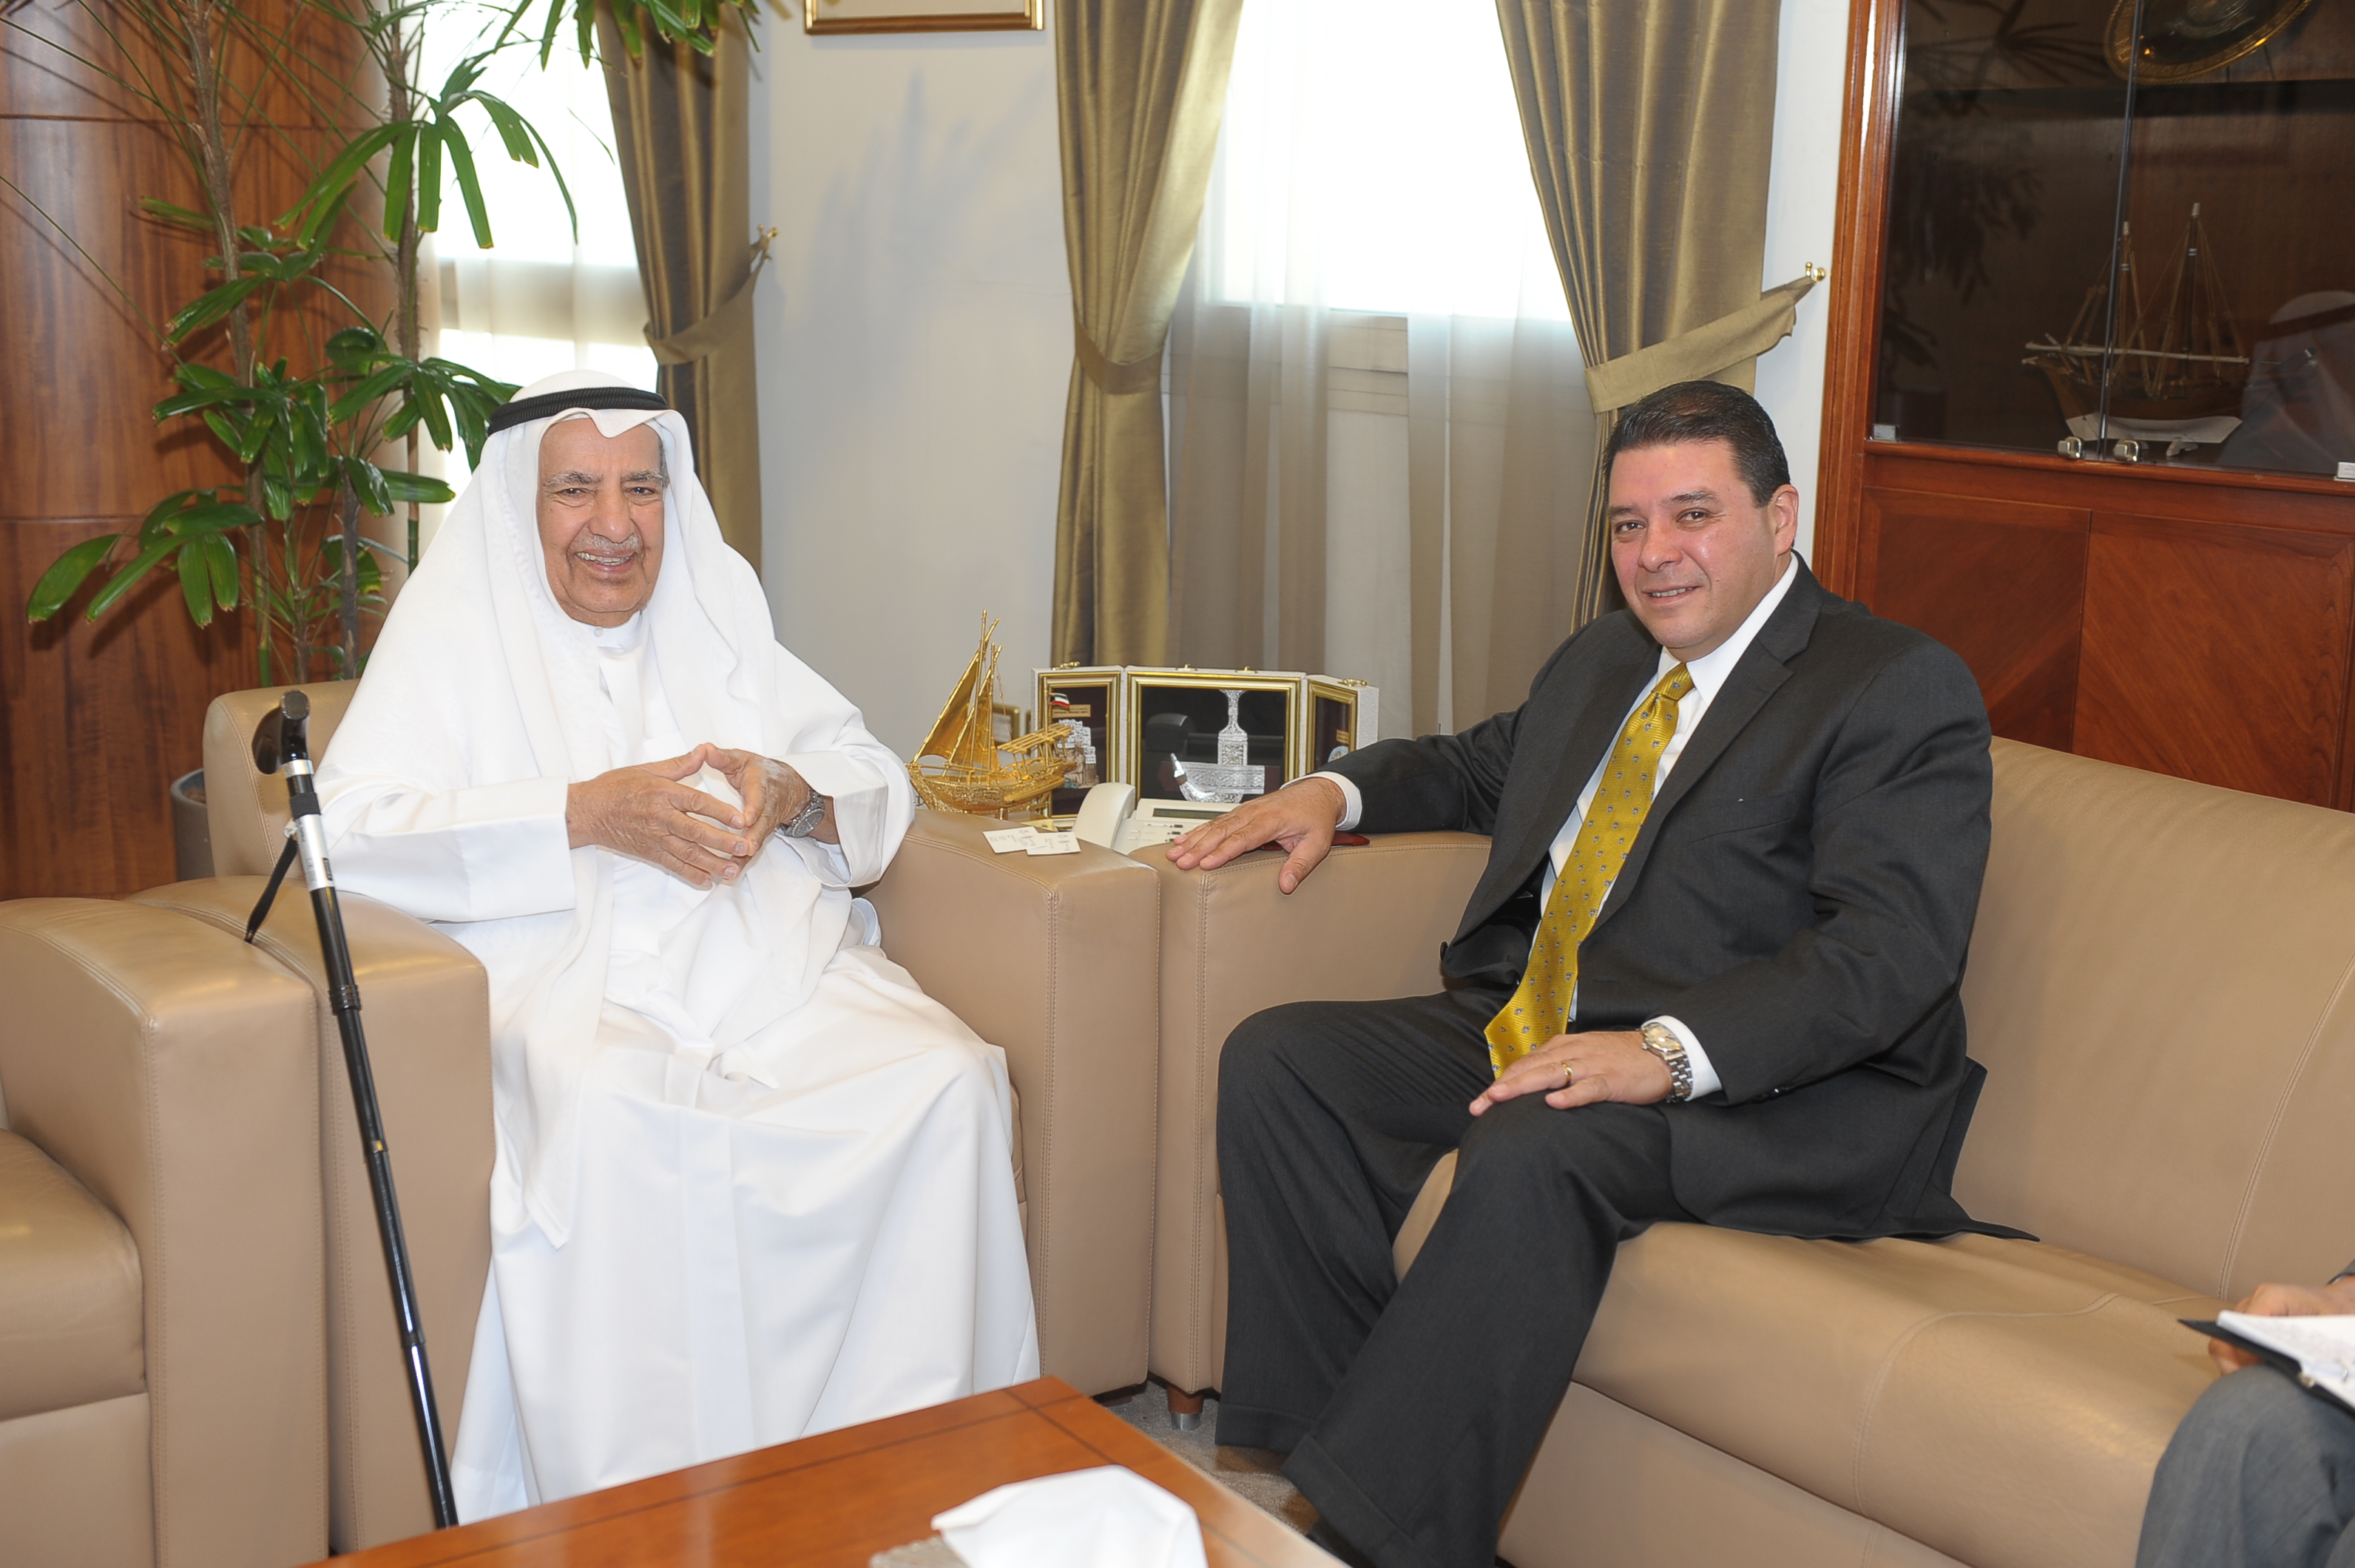 Chairman of the Kuwait Chamber of Commerce and Industry (KCCI) Ali Al-Ghanim and Mexican Ambassador to Kuwait Miguel Angel Isidro